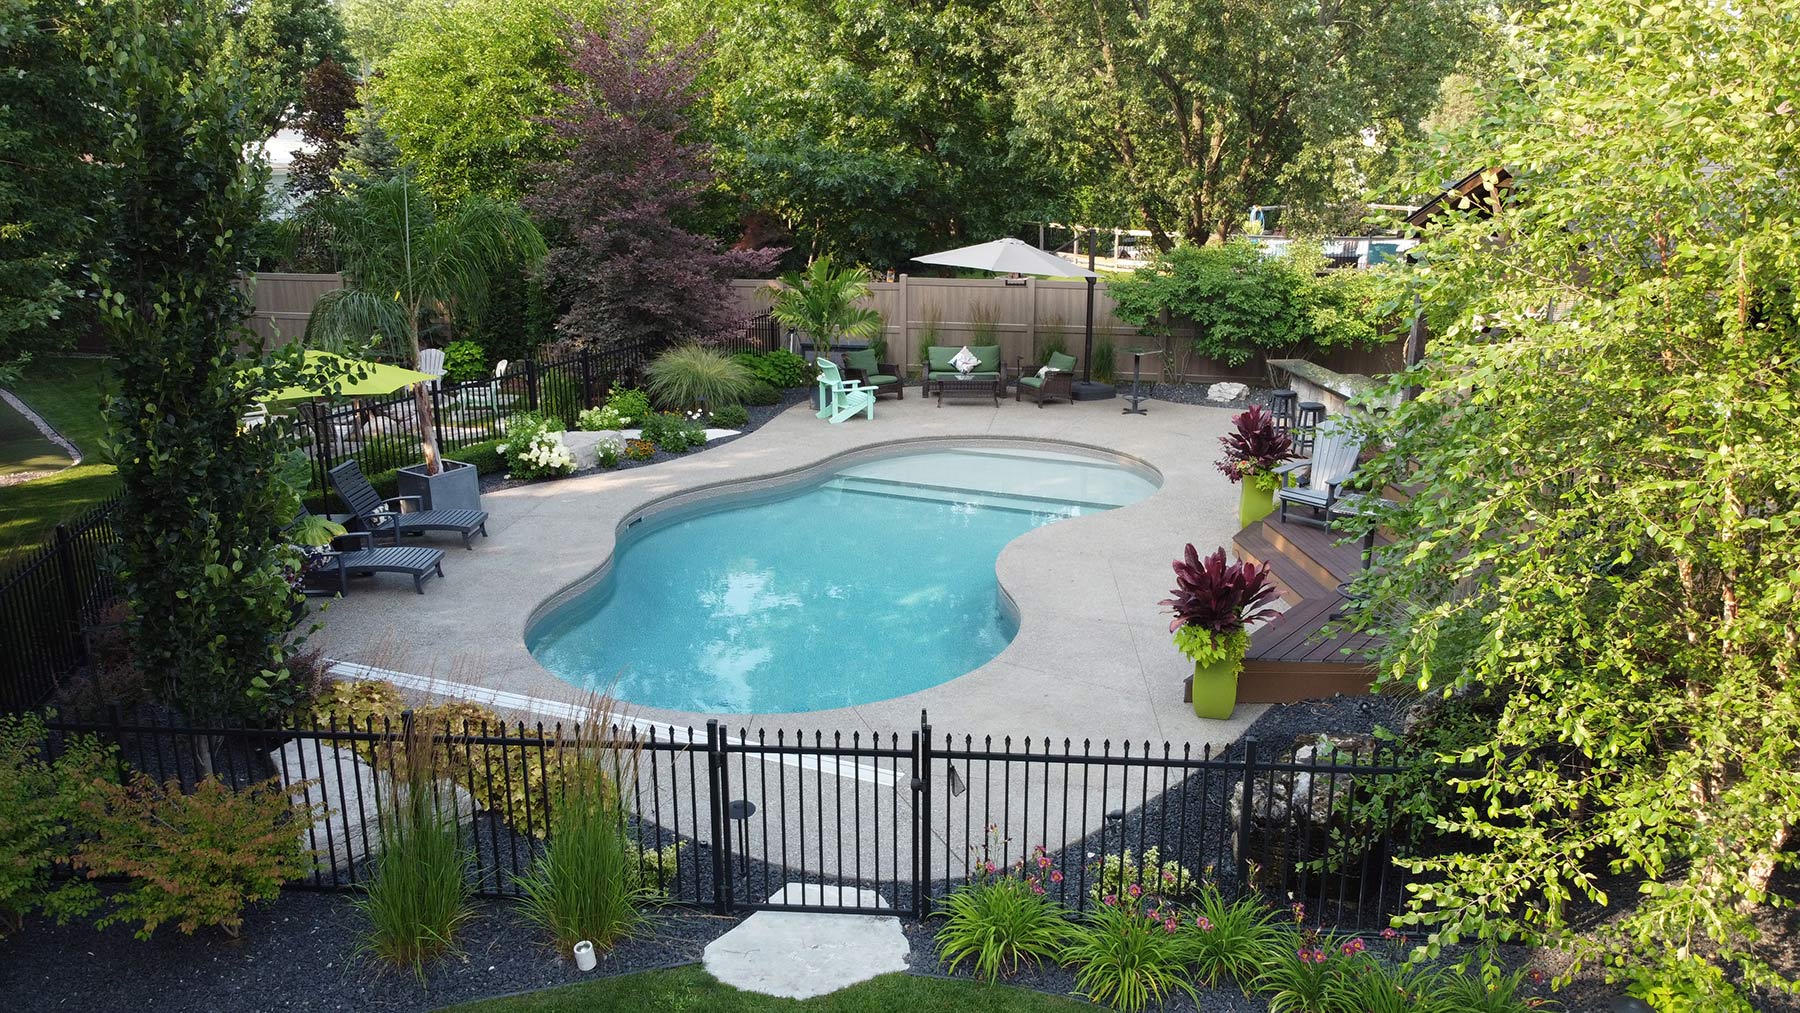 Gated pool surrounded by large shrubbery and greenery.